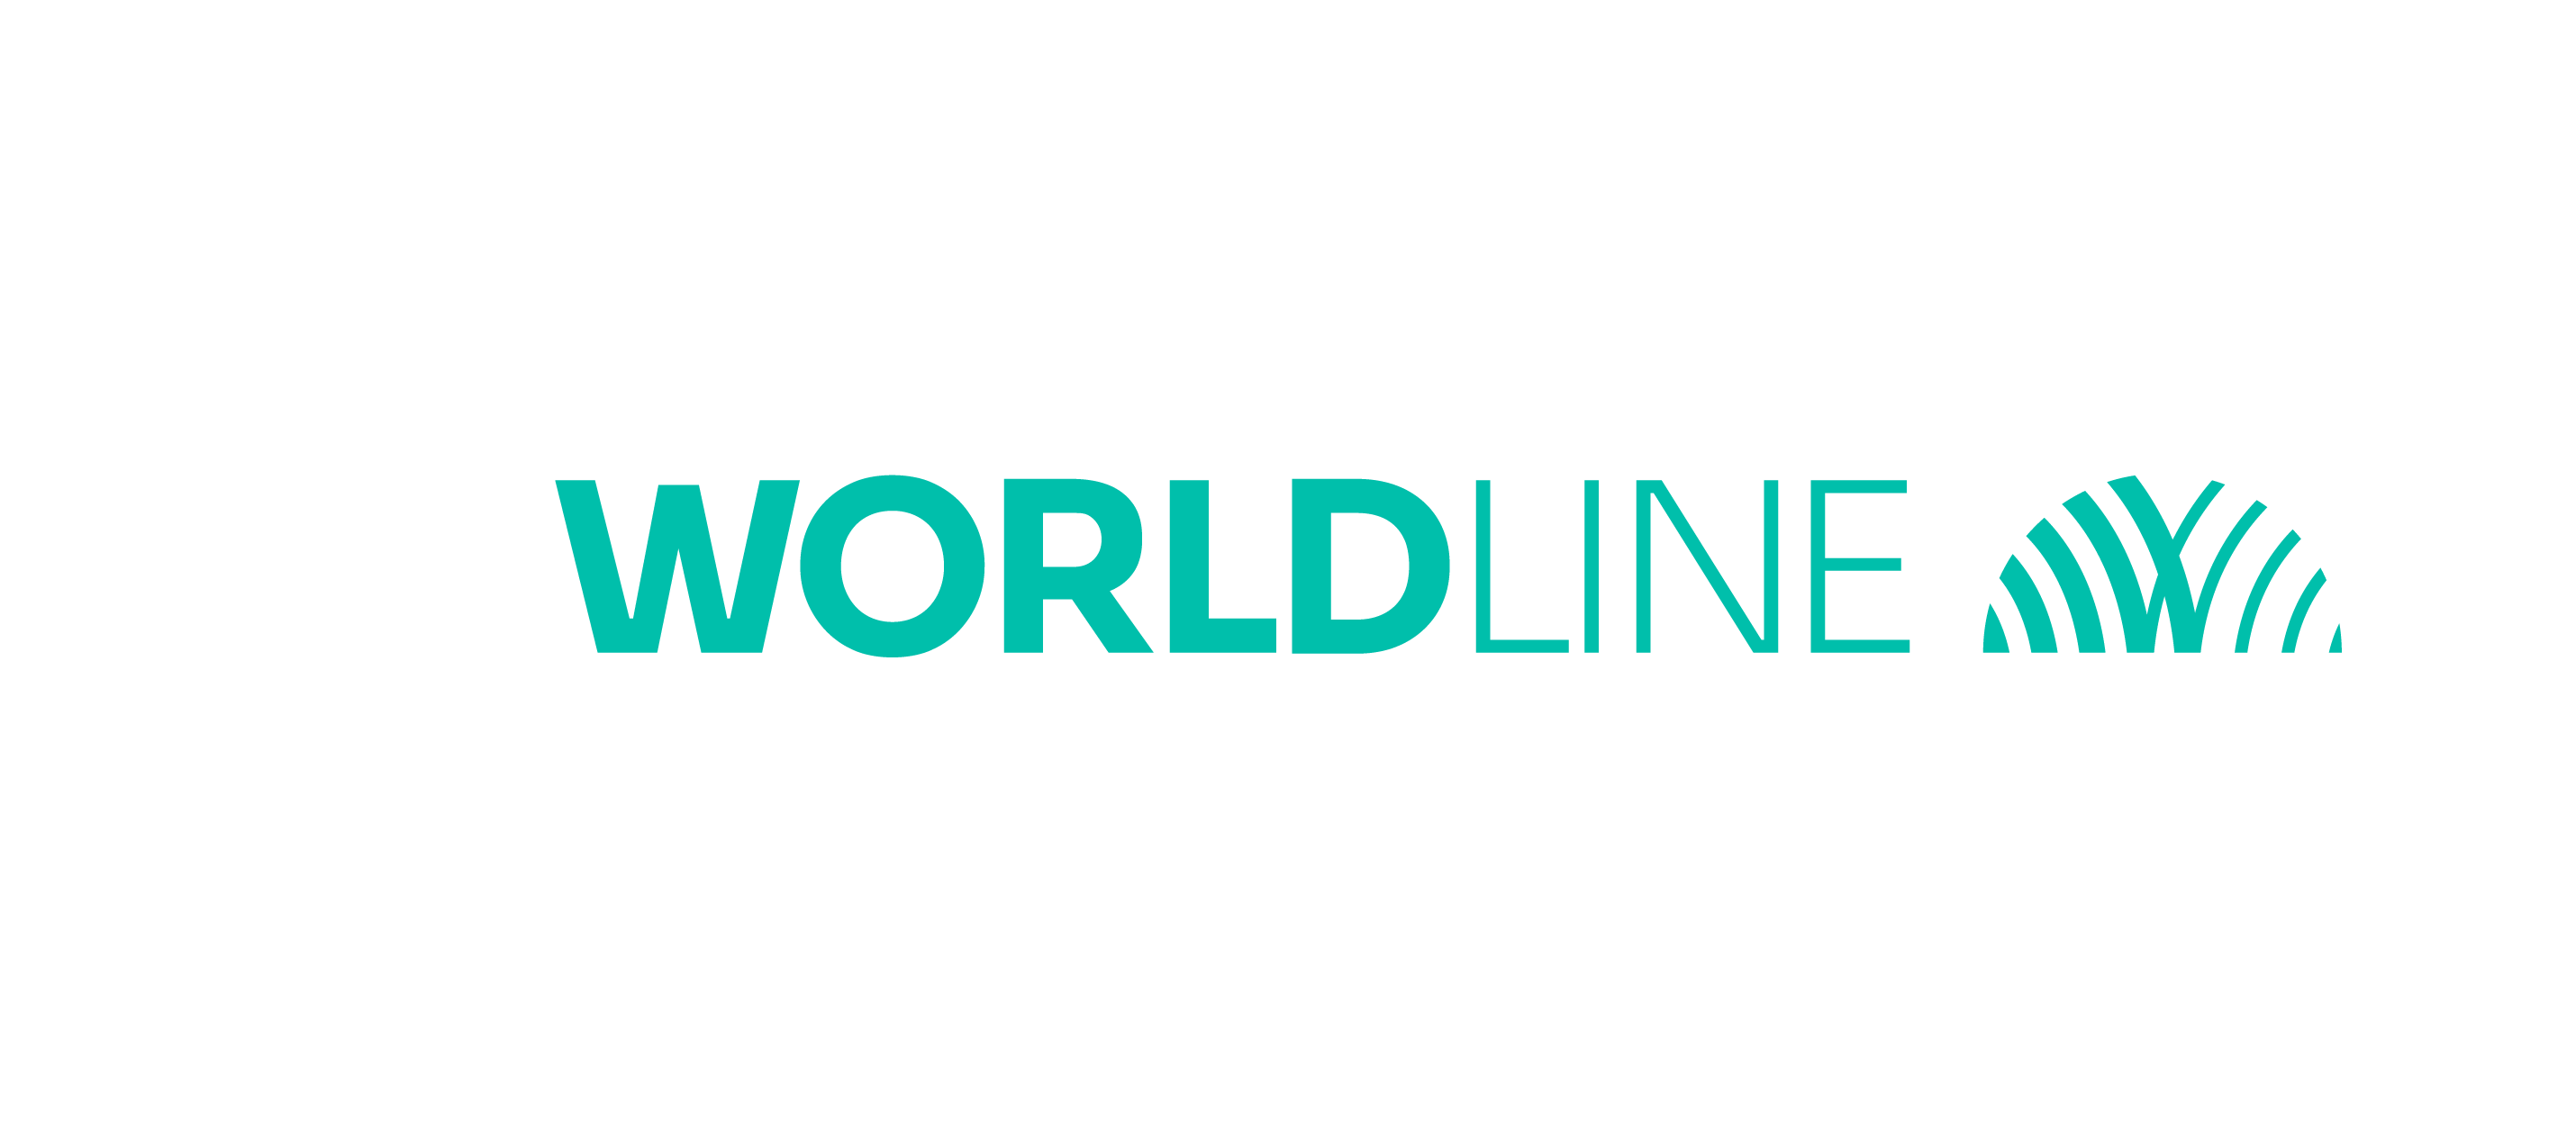 Worldline Strengthens Position as a CSR Leader According to Assessment from V.E, part of Moody’s ESG Solutions